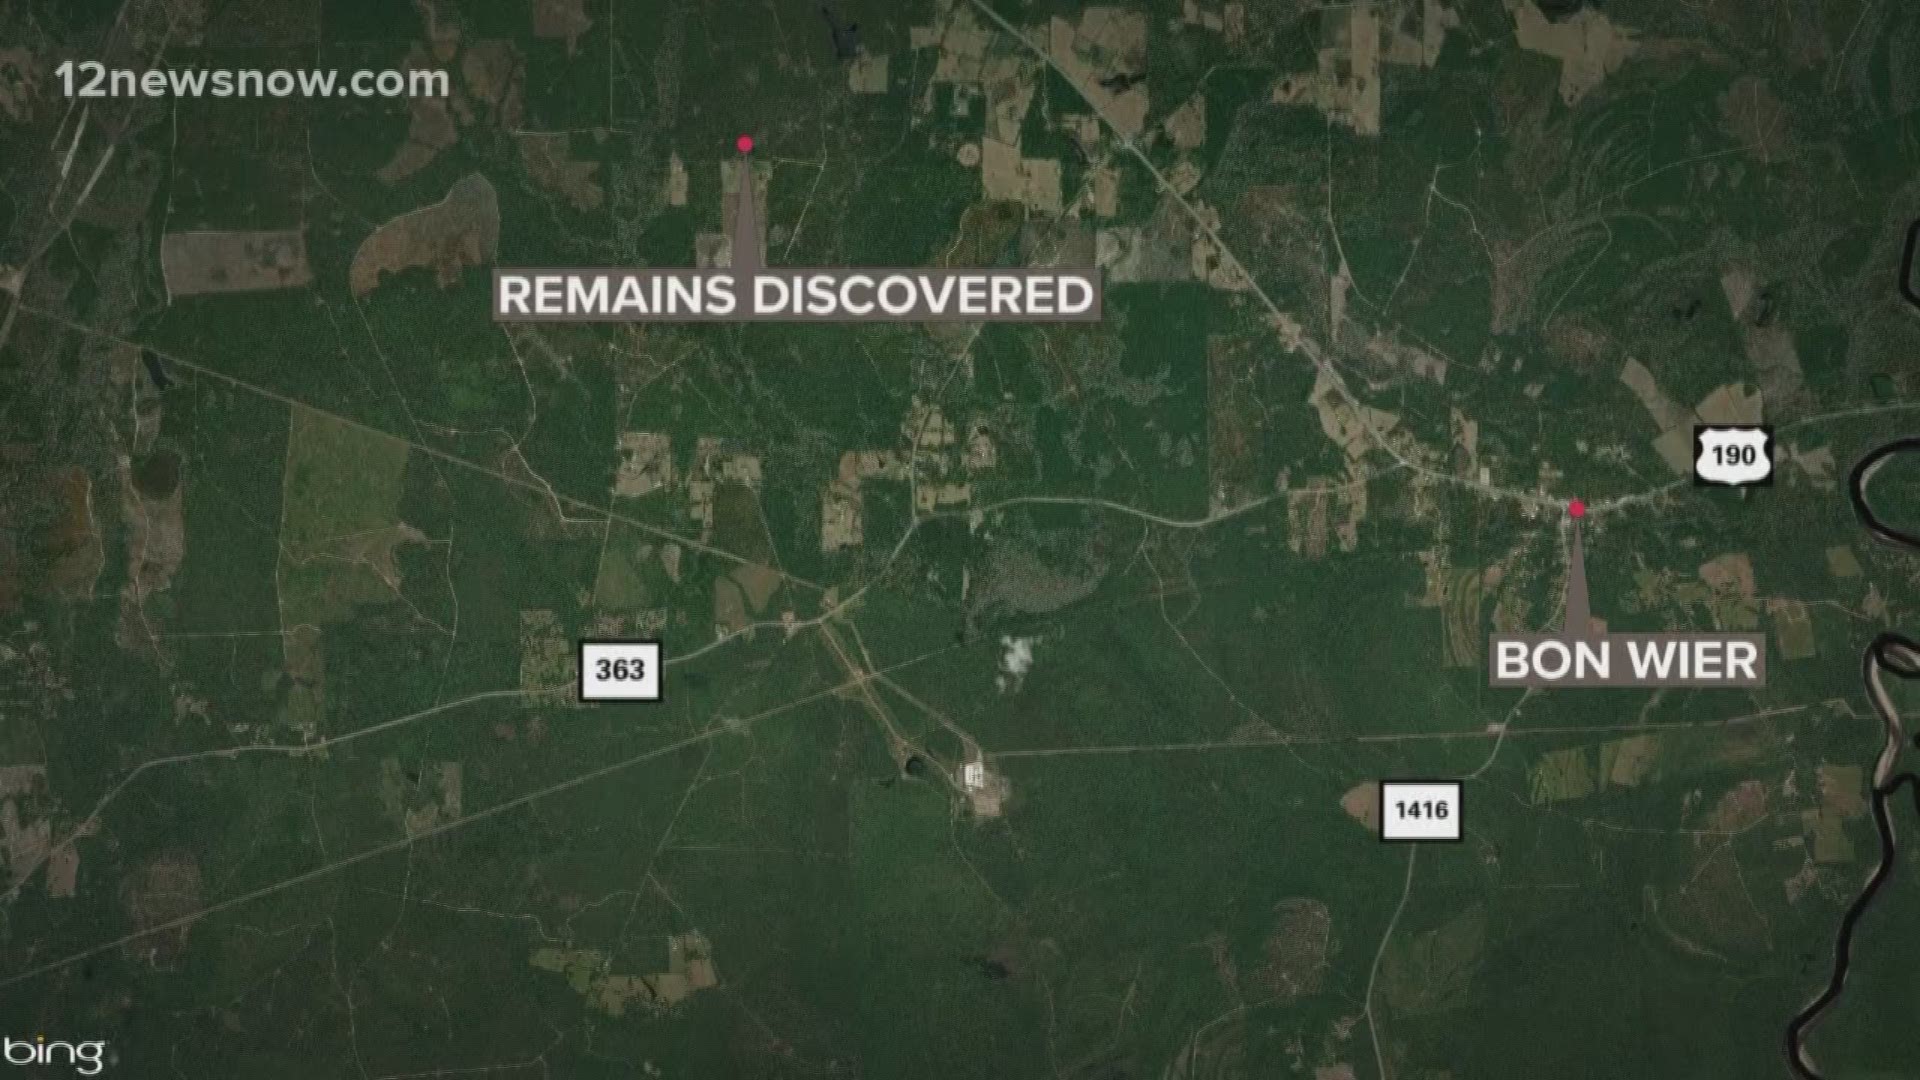 The New County Sheriff's office reported to the location after receiving a call made by loggers who found what they believed to be human remains.